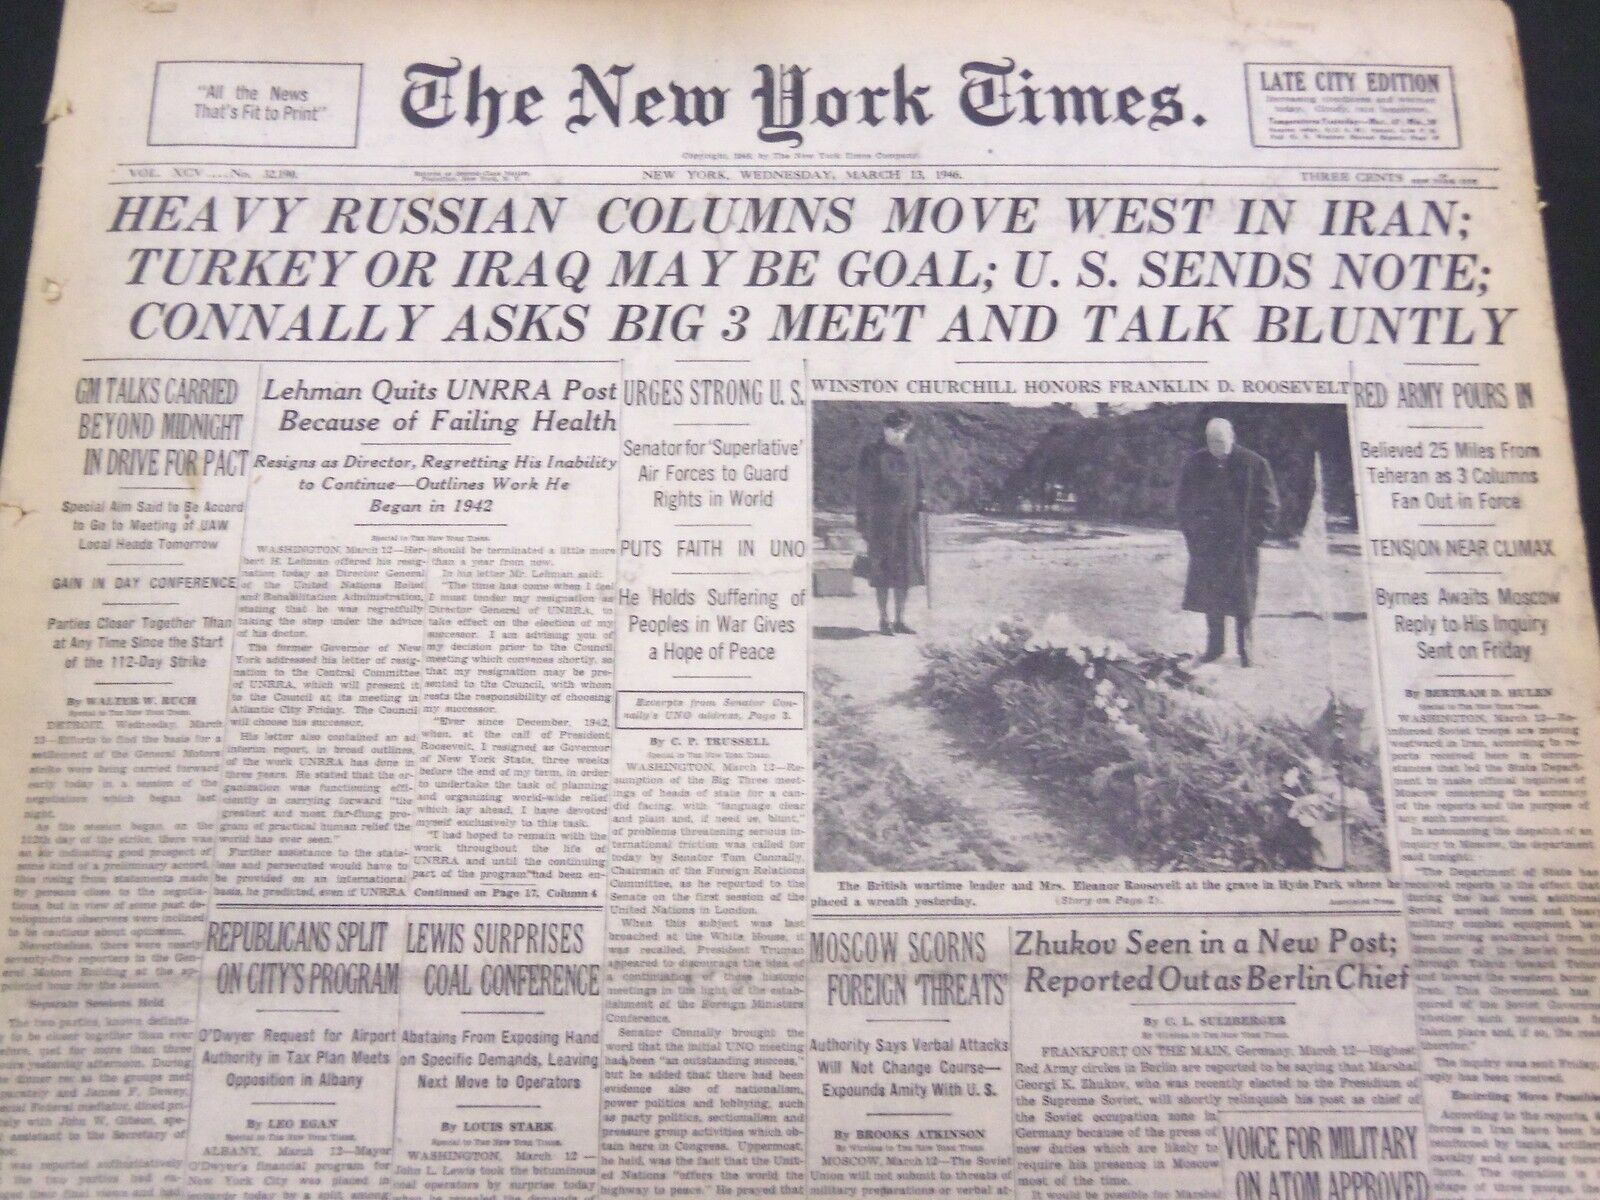 1946 MARCH 13 NEW YORK TIMES - RUSSIAN COLUMNS IN IRAN - NT 4225